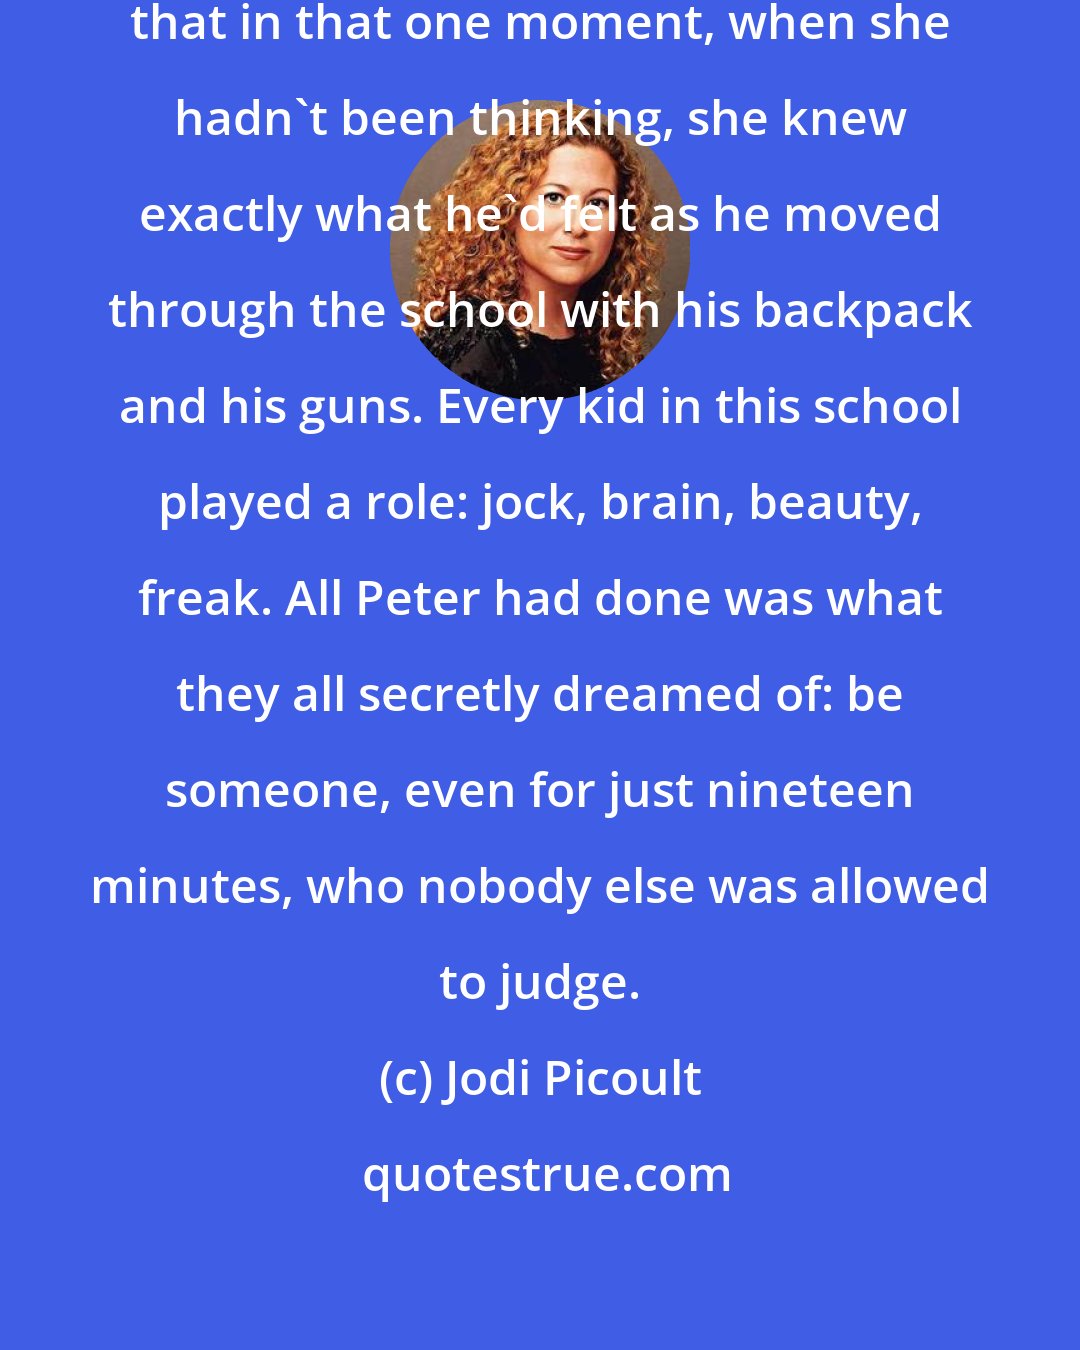 Jodi Picoult: She stared at Peter, and she realized that in that one moment, when she hadn't been thinking, she knew exactly what he'd felt as he moved through the school with his backpack and his guns. Every kid in this school played a role: jock, brain, beauty, freak. All Peter had done was what they all secretly dreamed of: be someone, even for just nineteen minutes, who nobody else was allowed to judge.